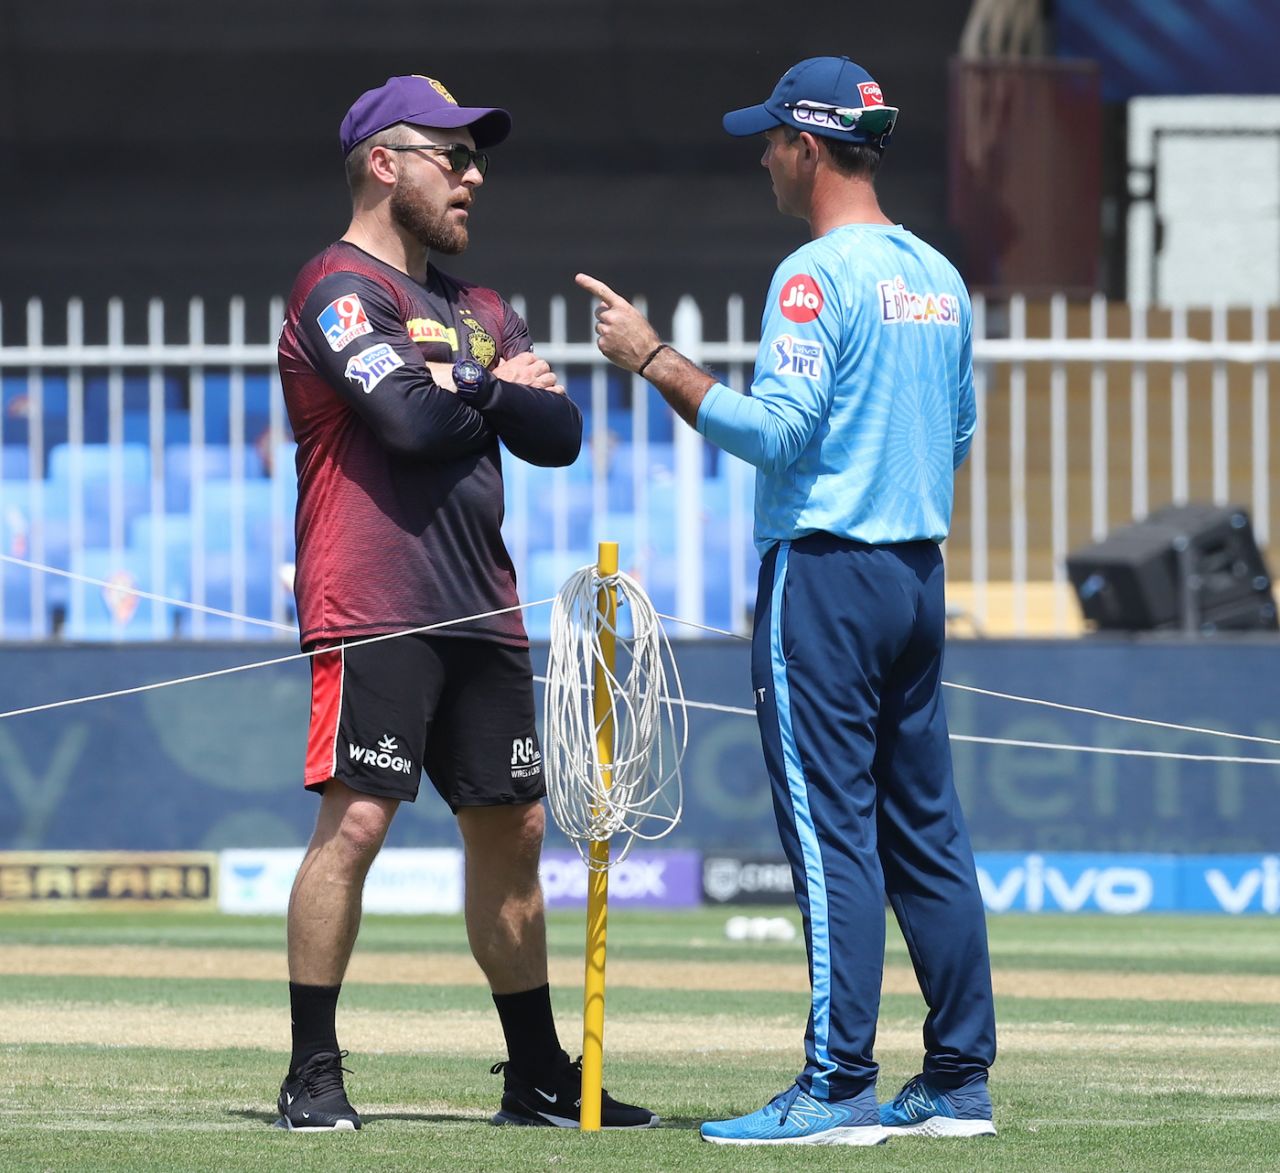 Brendon McCullum and Ricky Ponting catch up before the game, Kolkata Knight Riders vs Delhi Capitals, IPL 2021, Sharjah, September 28, 2021